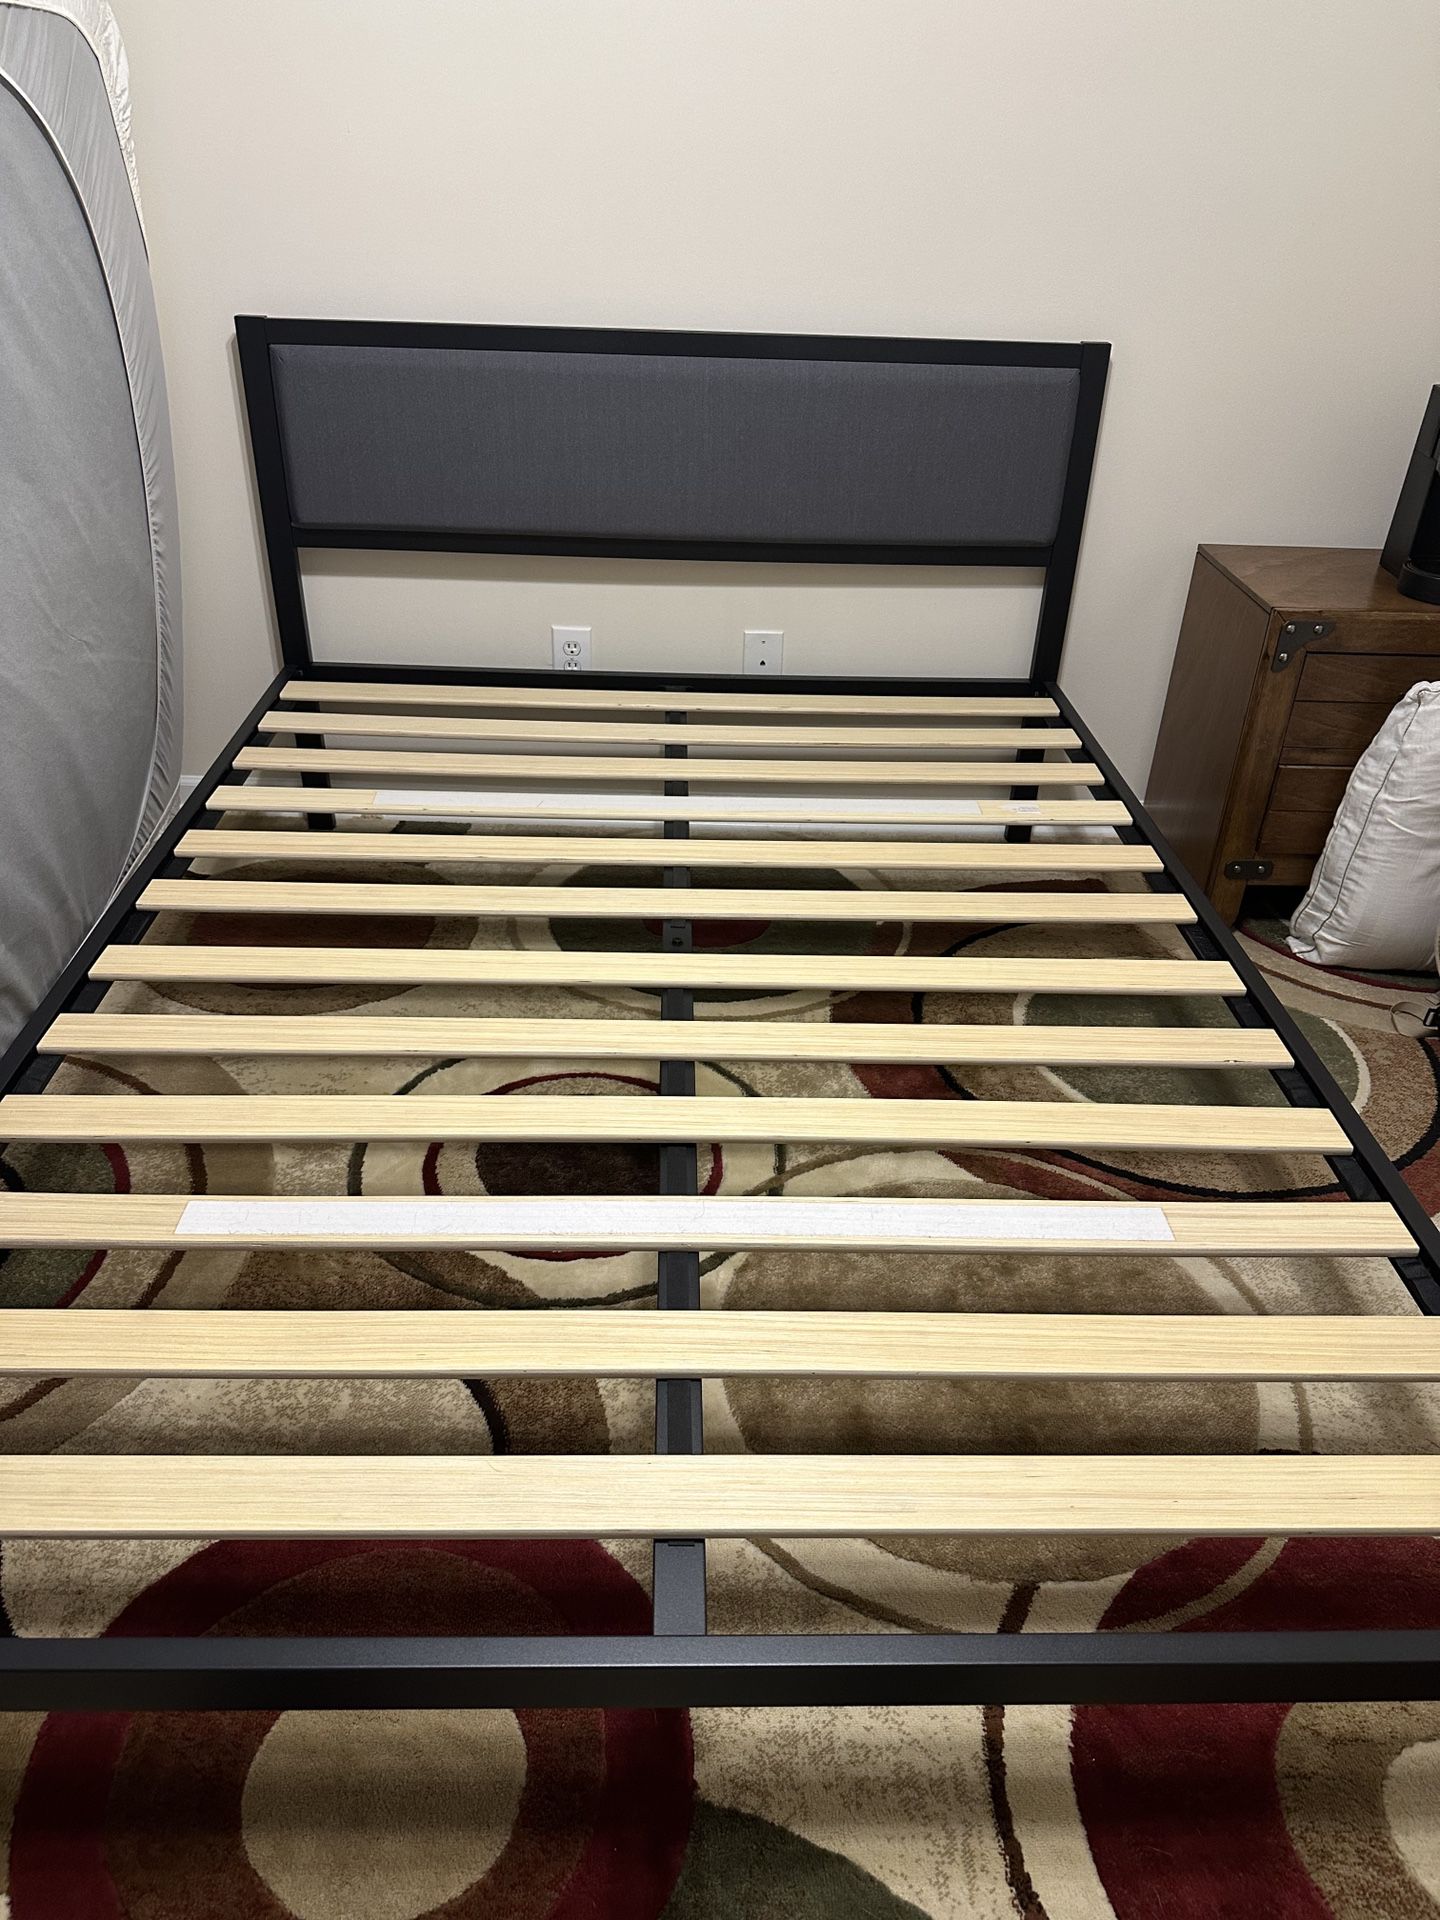 Queen Sized Bed Frame 